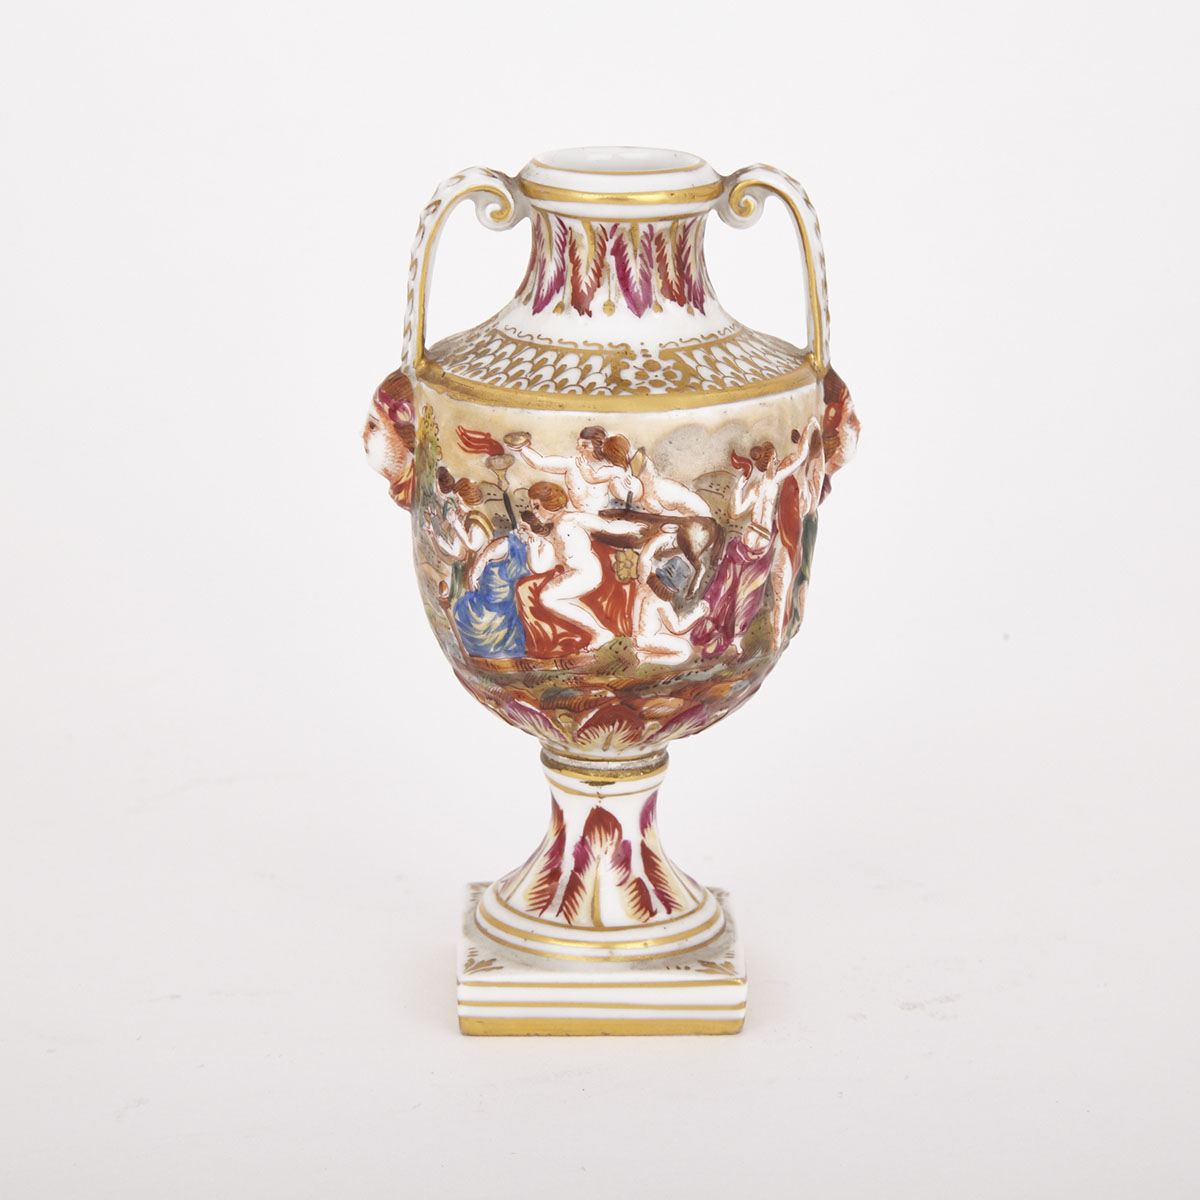 ‘Naples’ Small Two-Handled Urn, 20th century